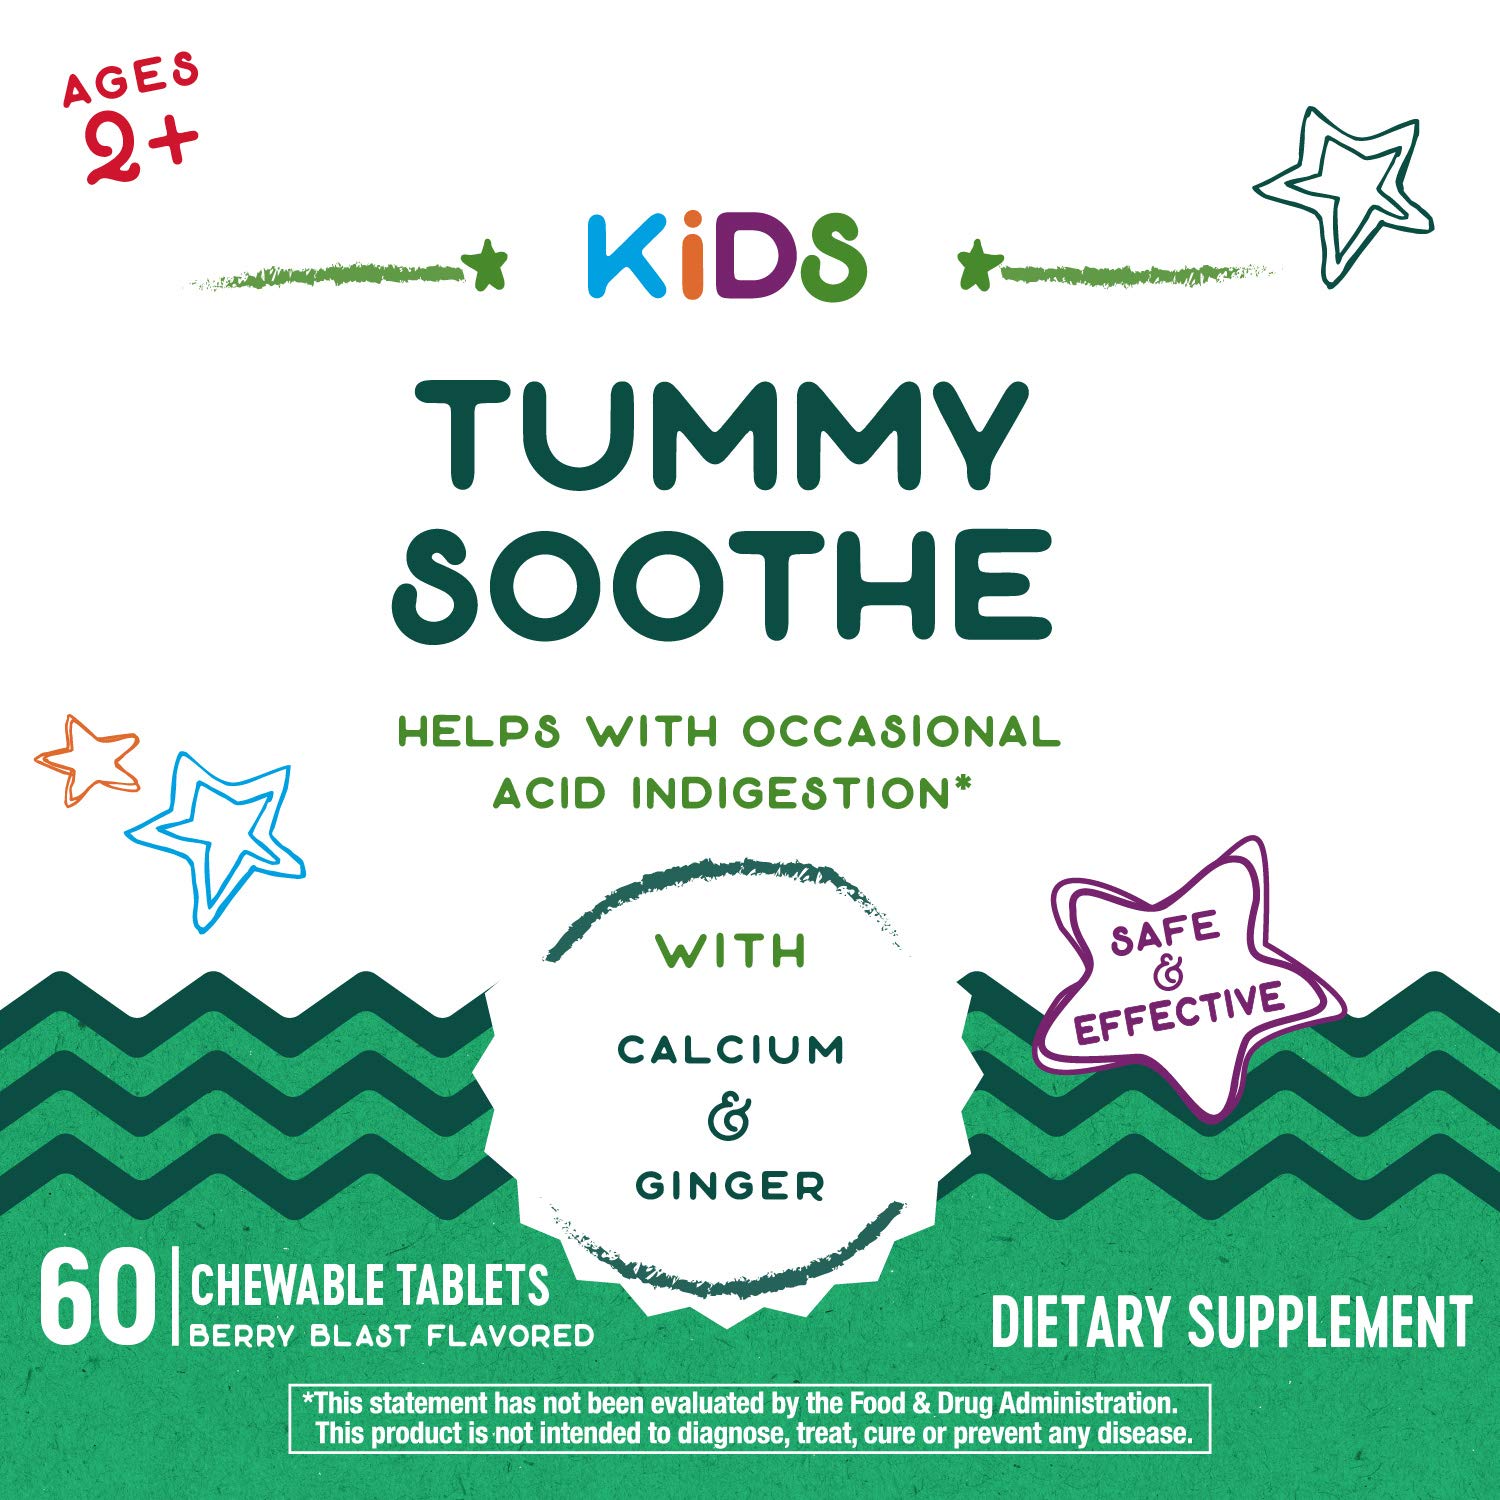 Nature’s Way Kids Tummy Soothe, with Calcium & Ginger, Berry Blast Flavored, 60 Vegetarian Chewables